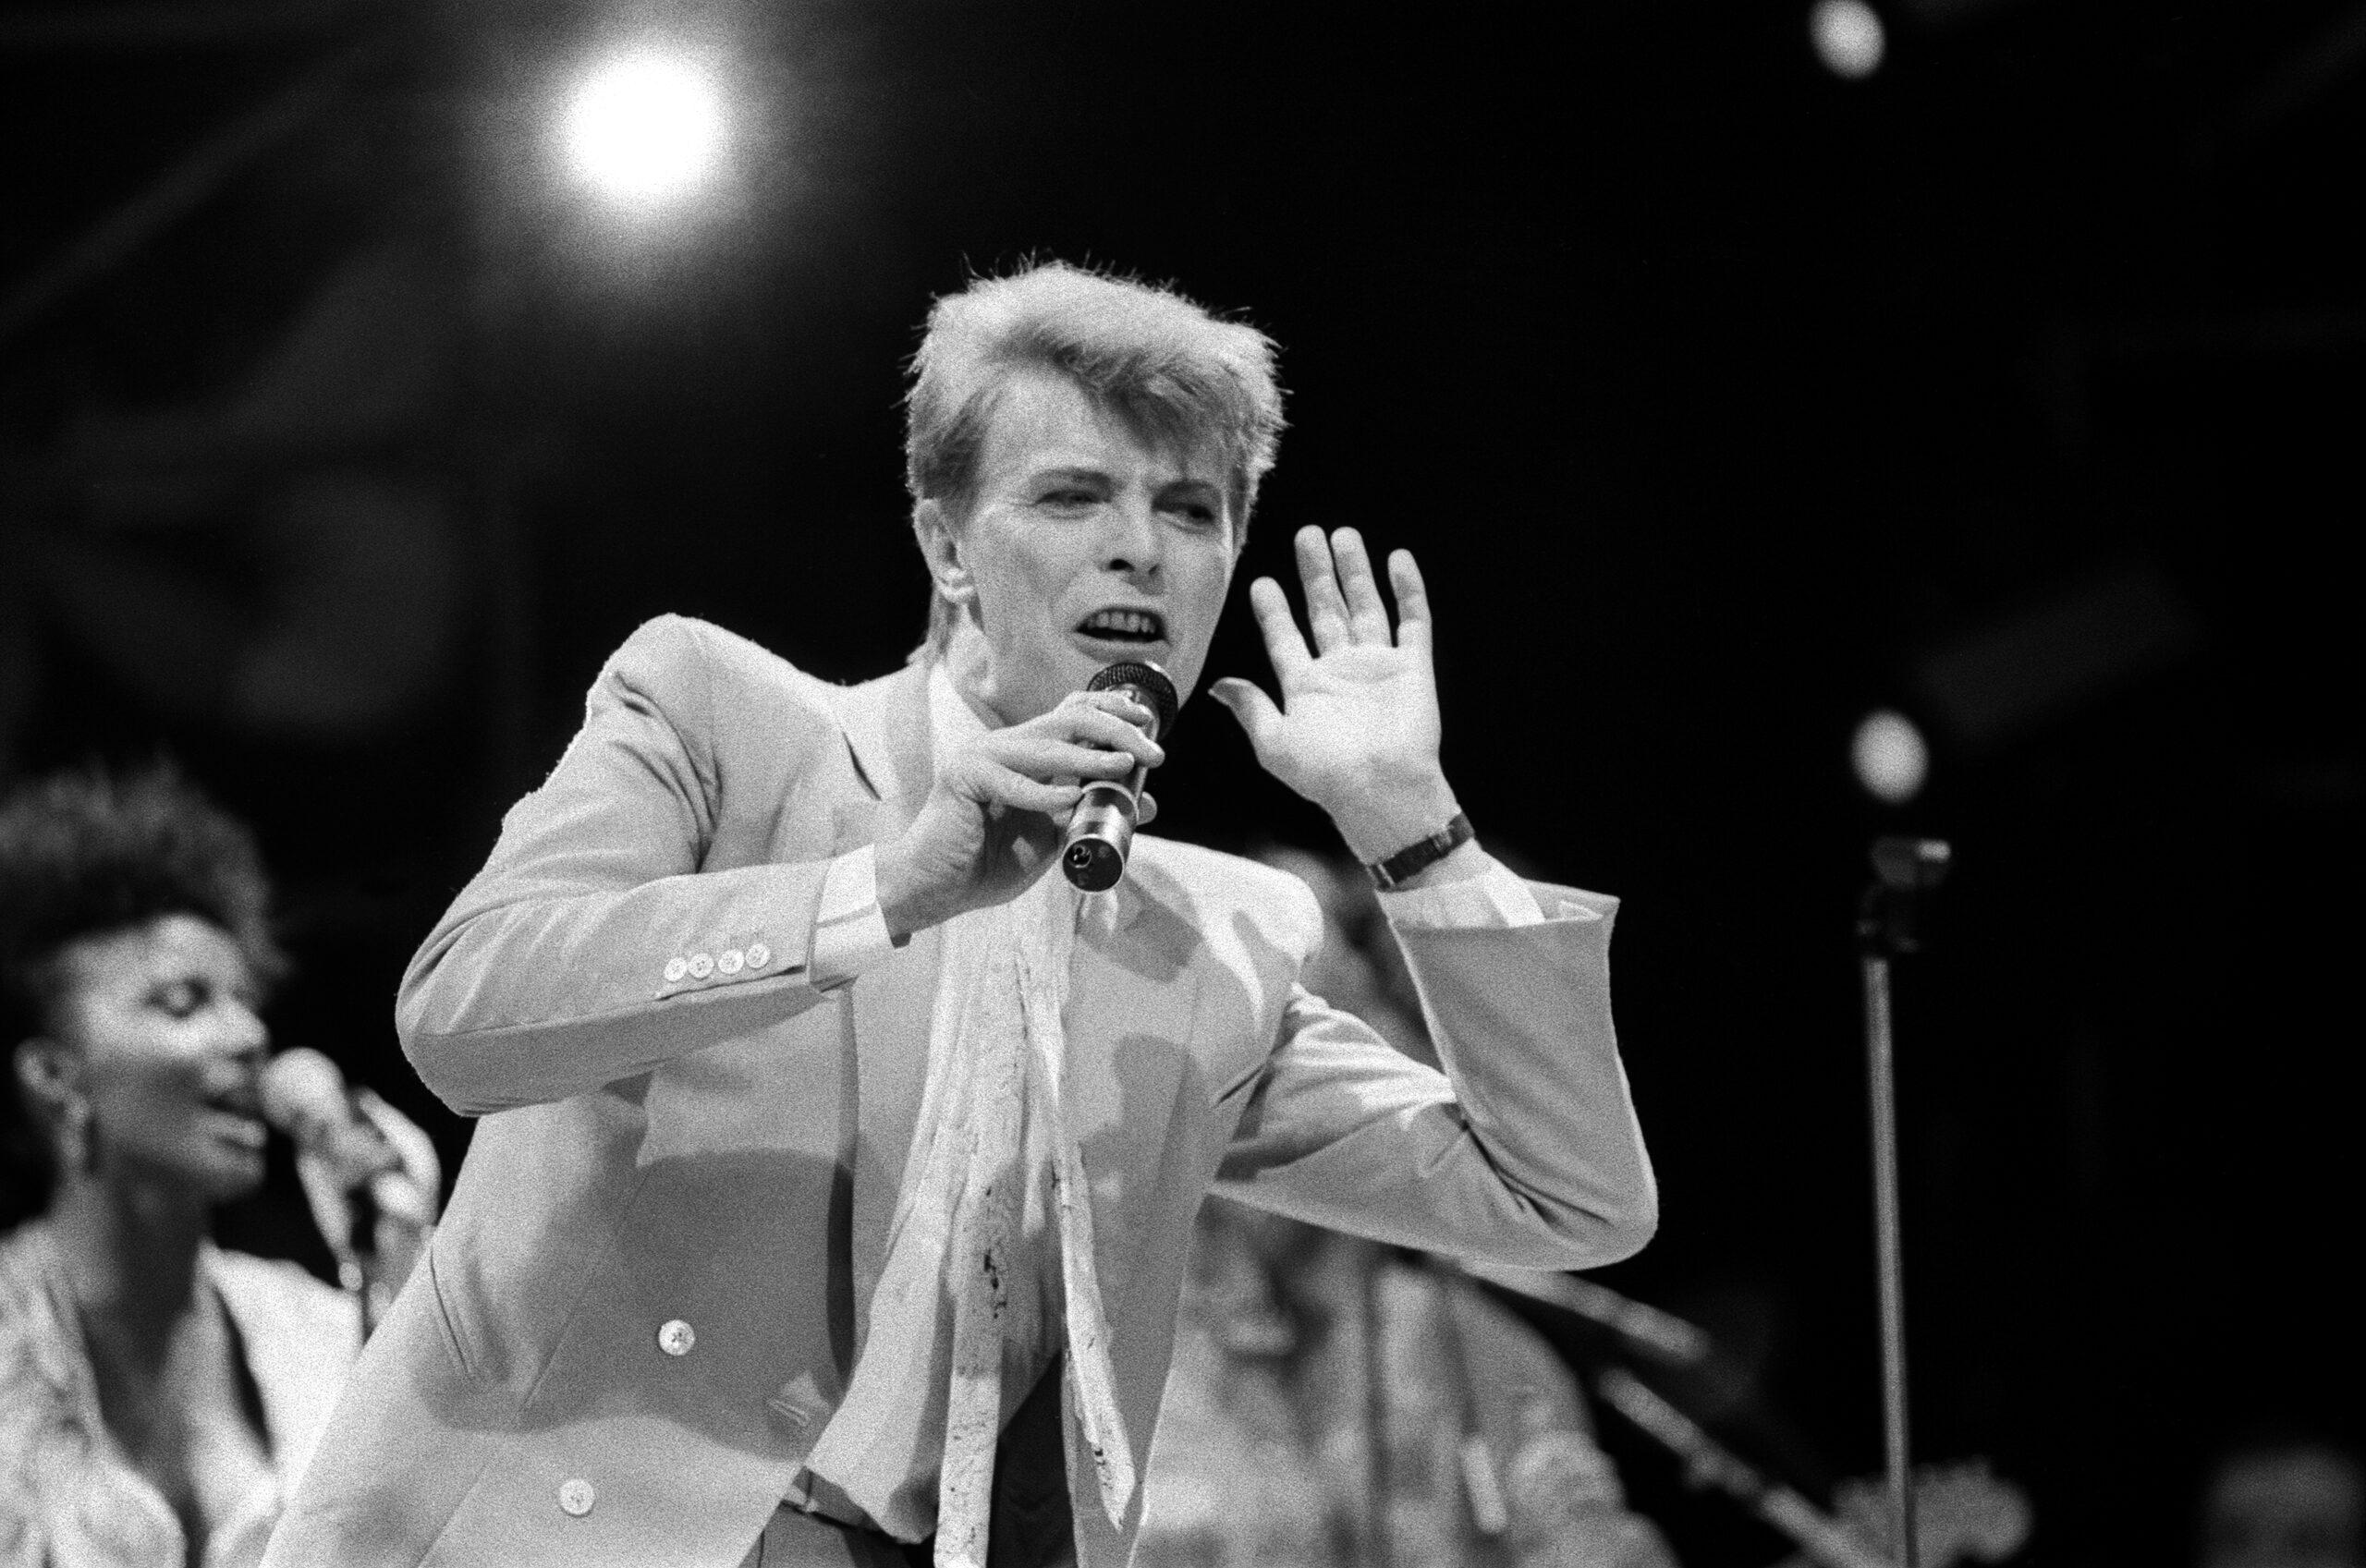 British pop singer David Bowie performing on stage during the Live Aid concert at Wembley Stadium. 13th July 1985. 